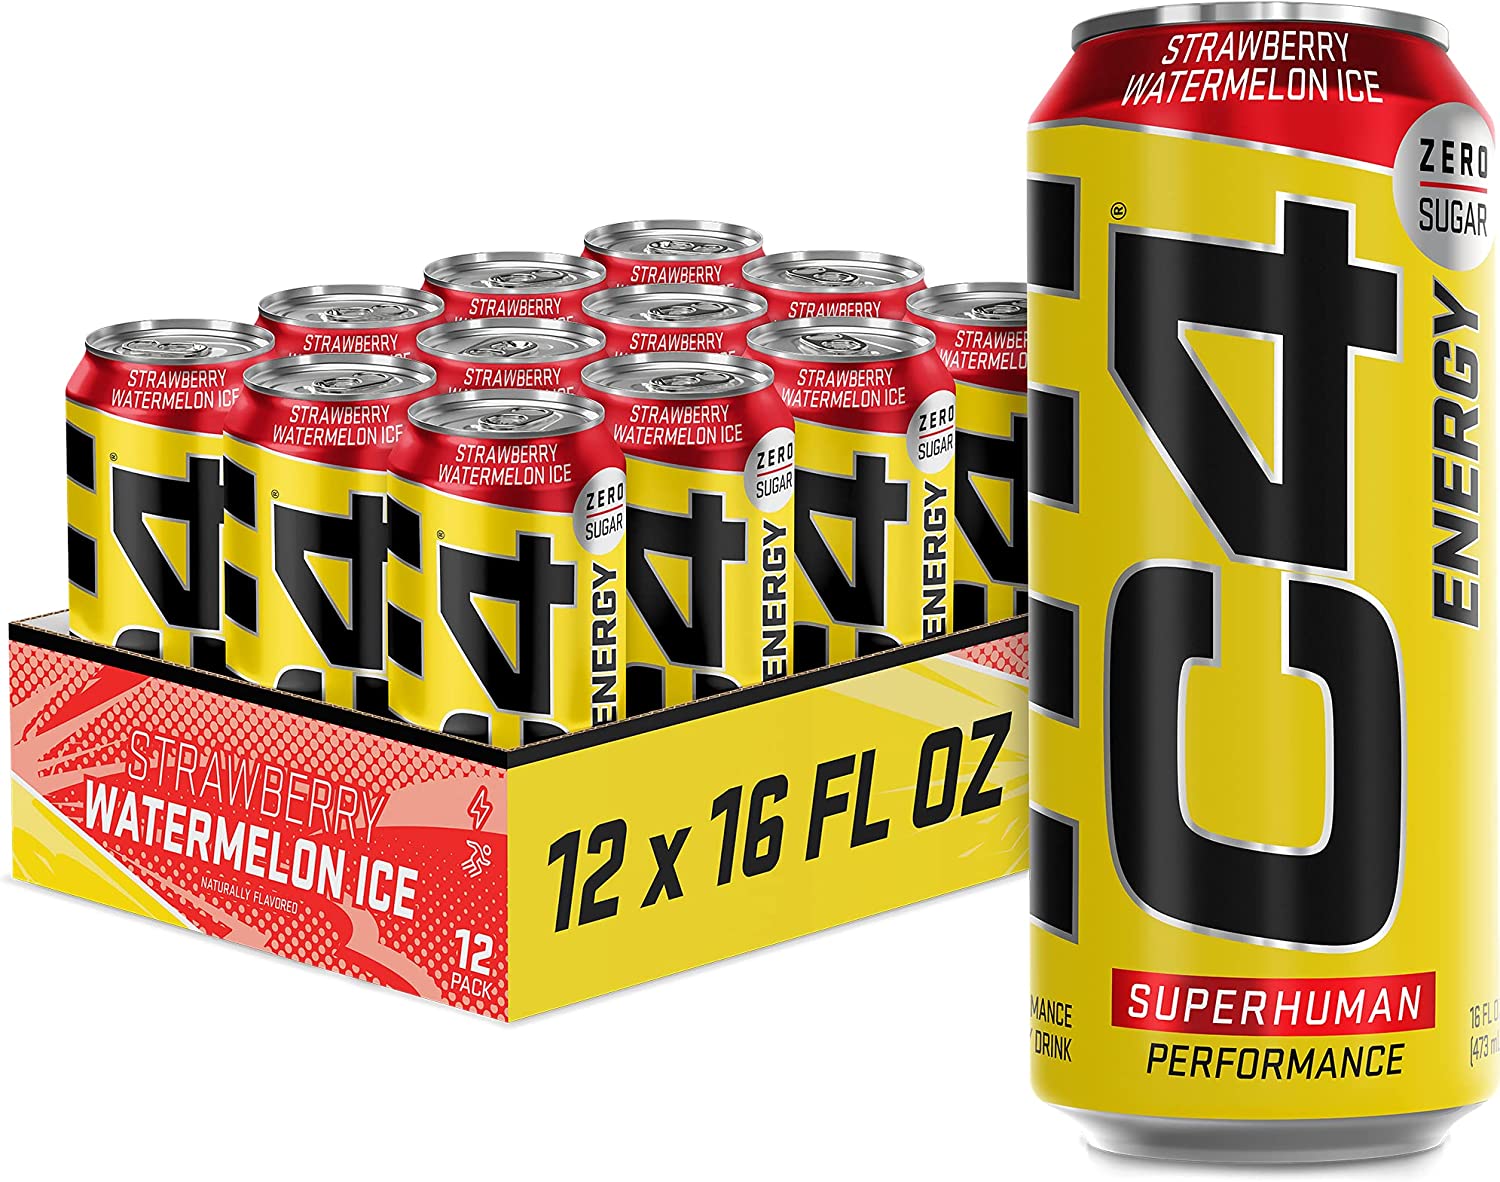 12-Pack 16-Oz C4 Energy Drink (Strawberry Watermelon Ice) $8.25 at The Vitamin Shoppe w/ Free Store Pickup (YMMV)